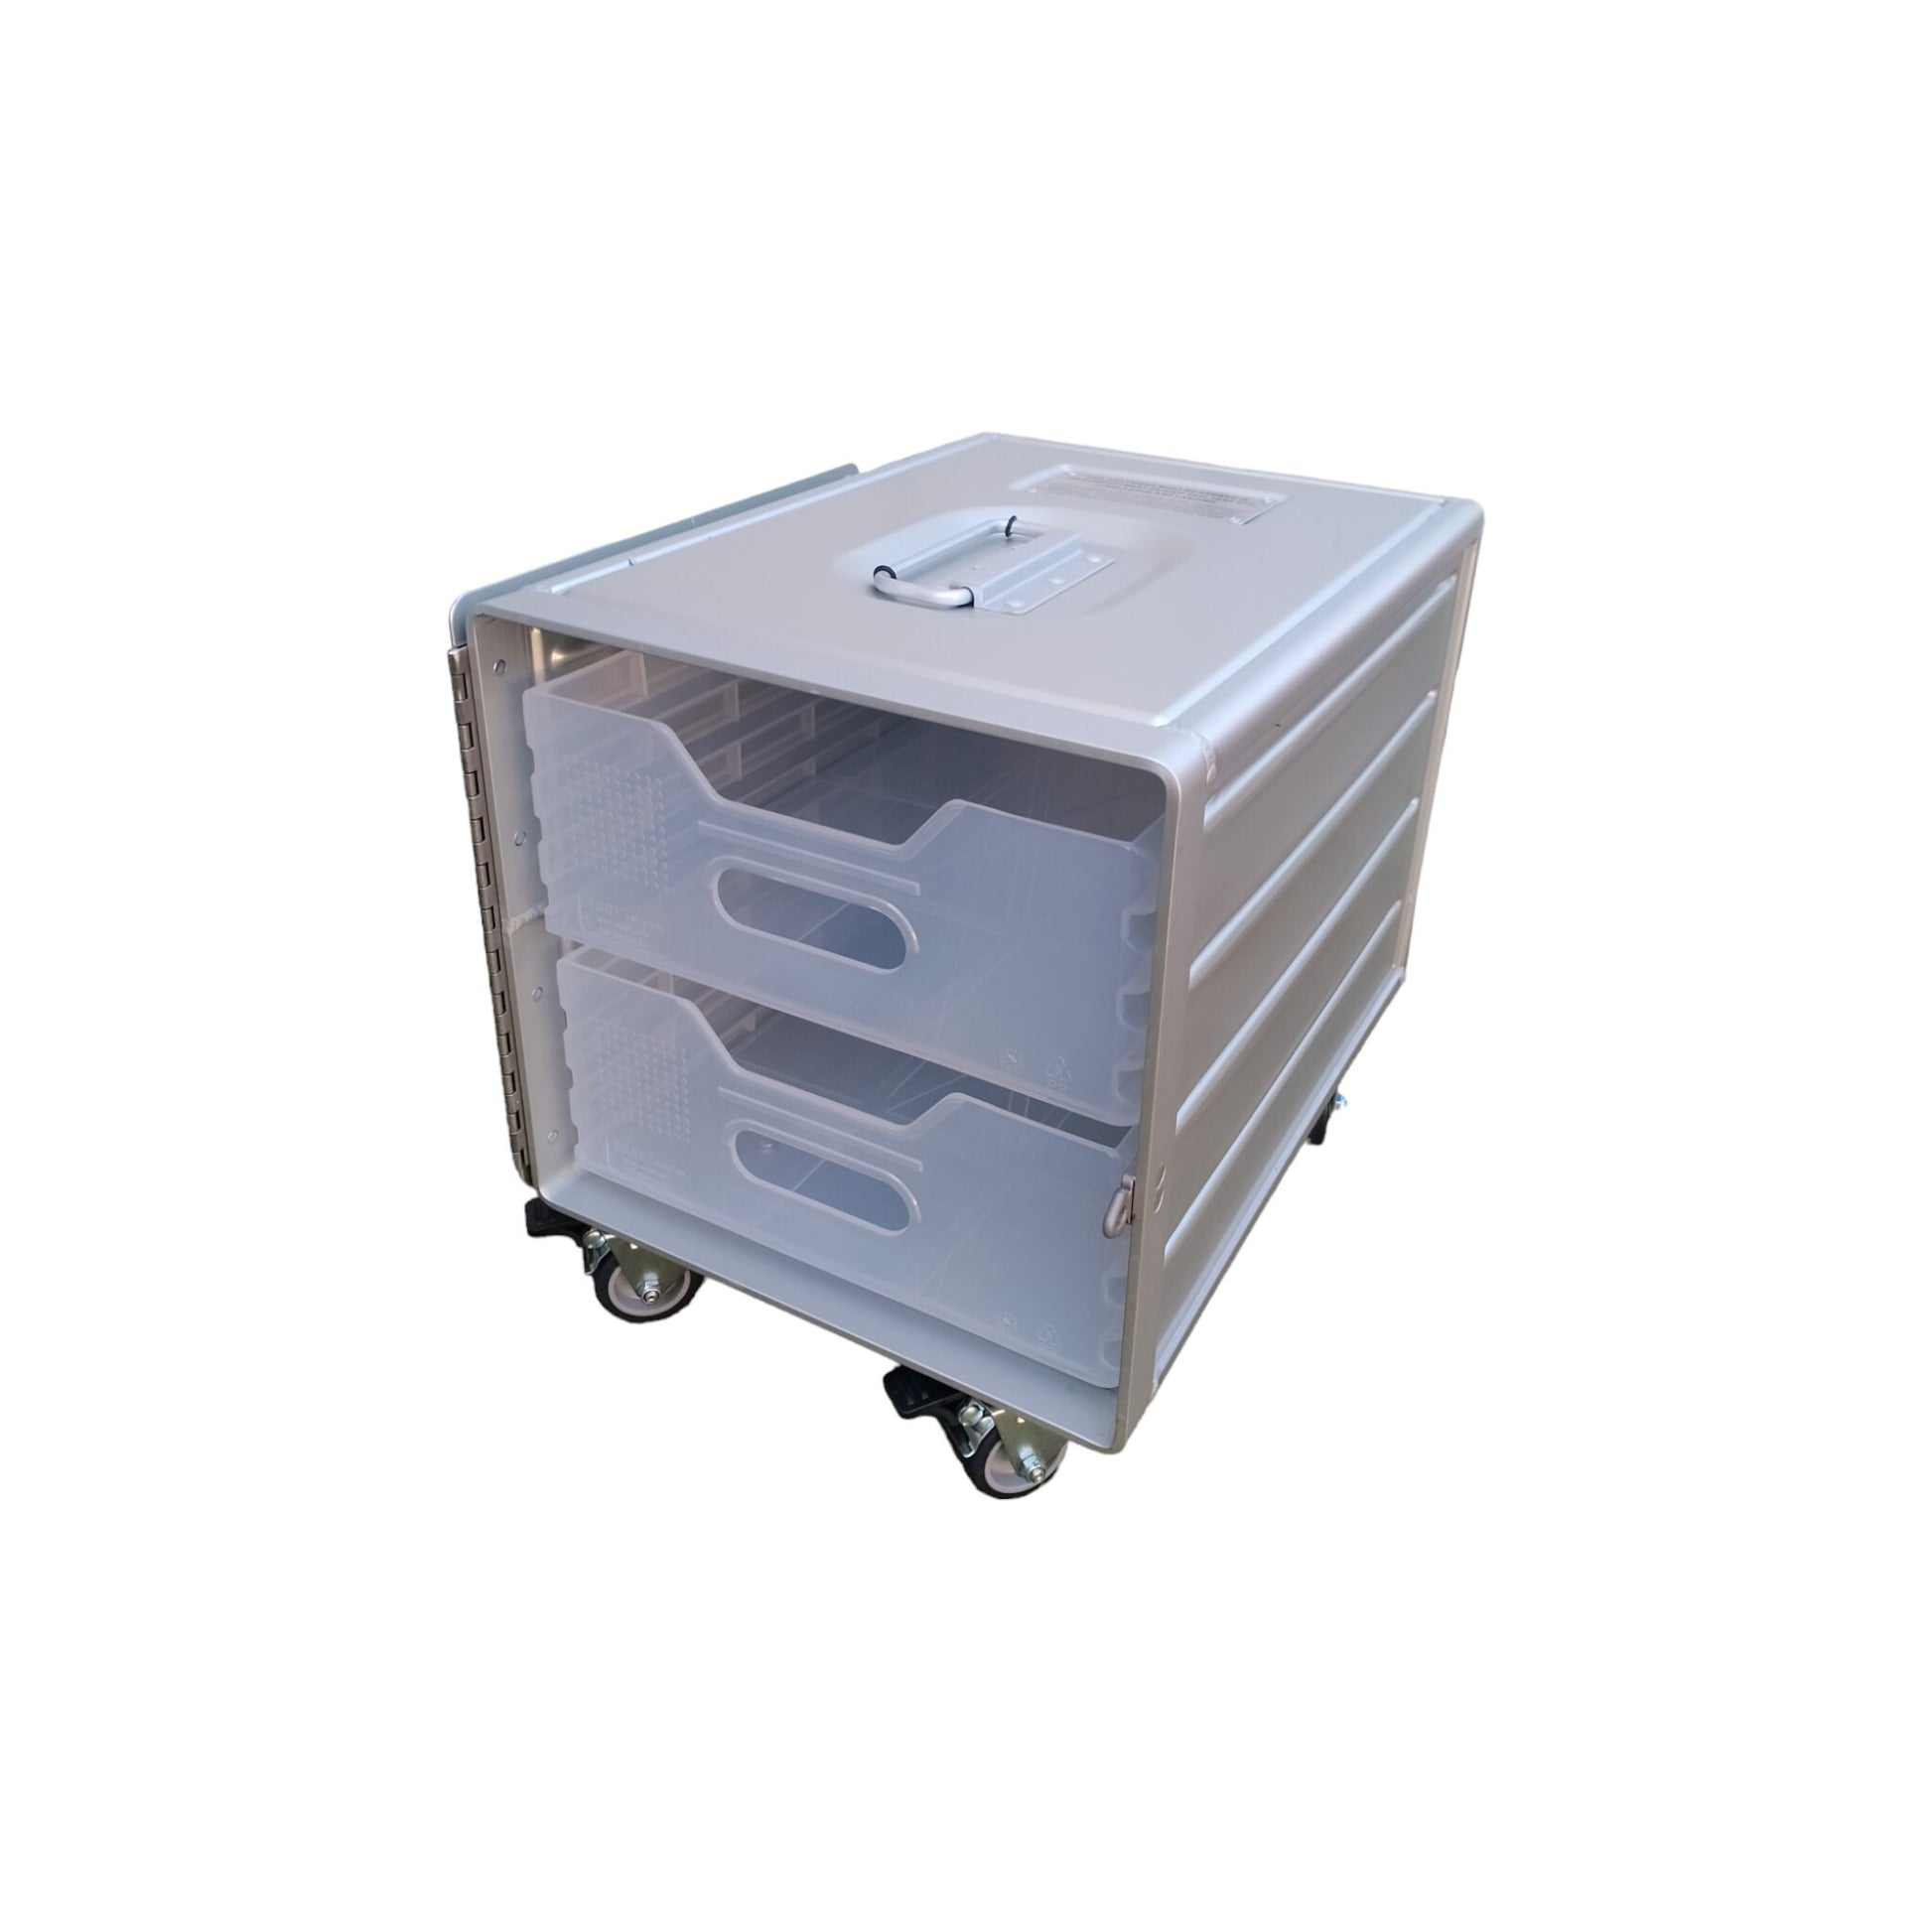 Brand New Airline Galley Storage Box as Side Table, Storage Cabinet, Aviation Design